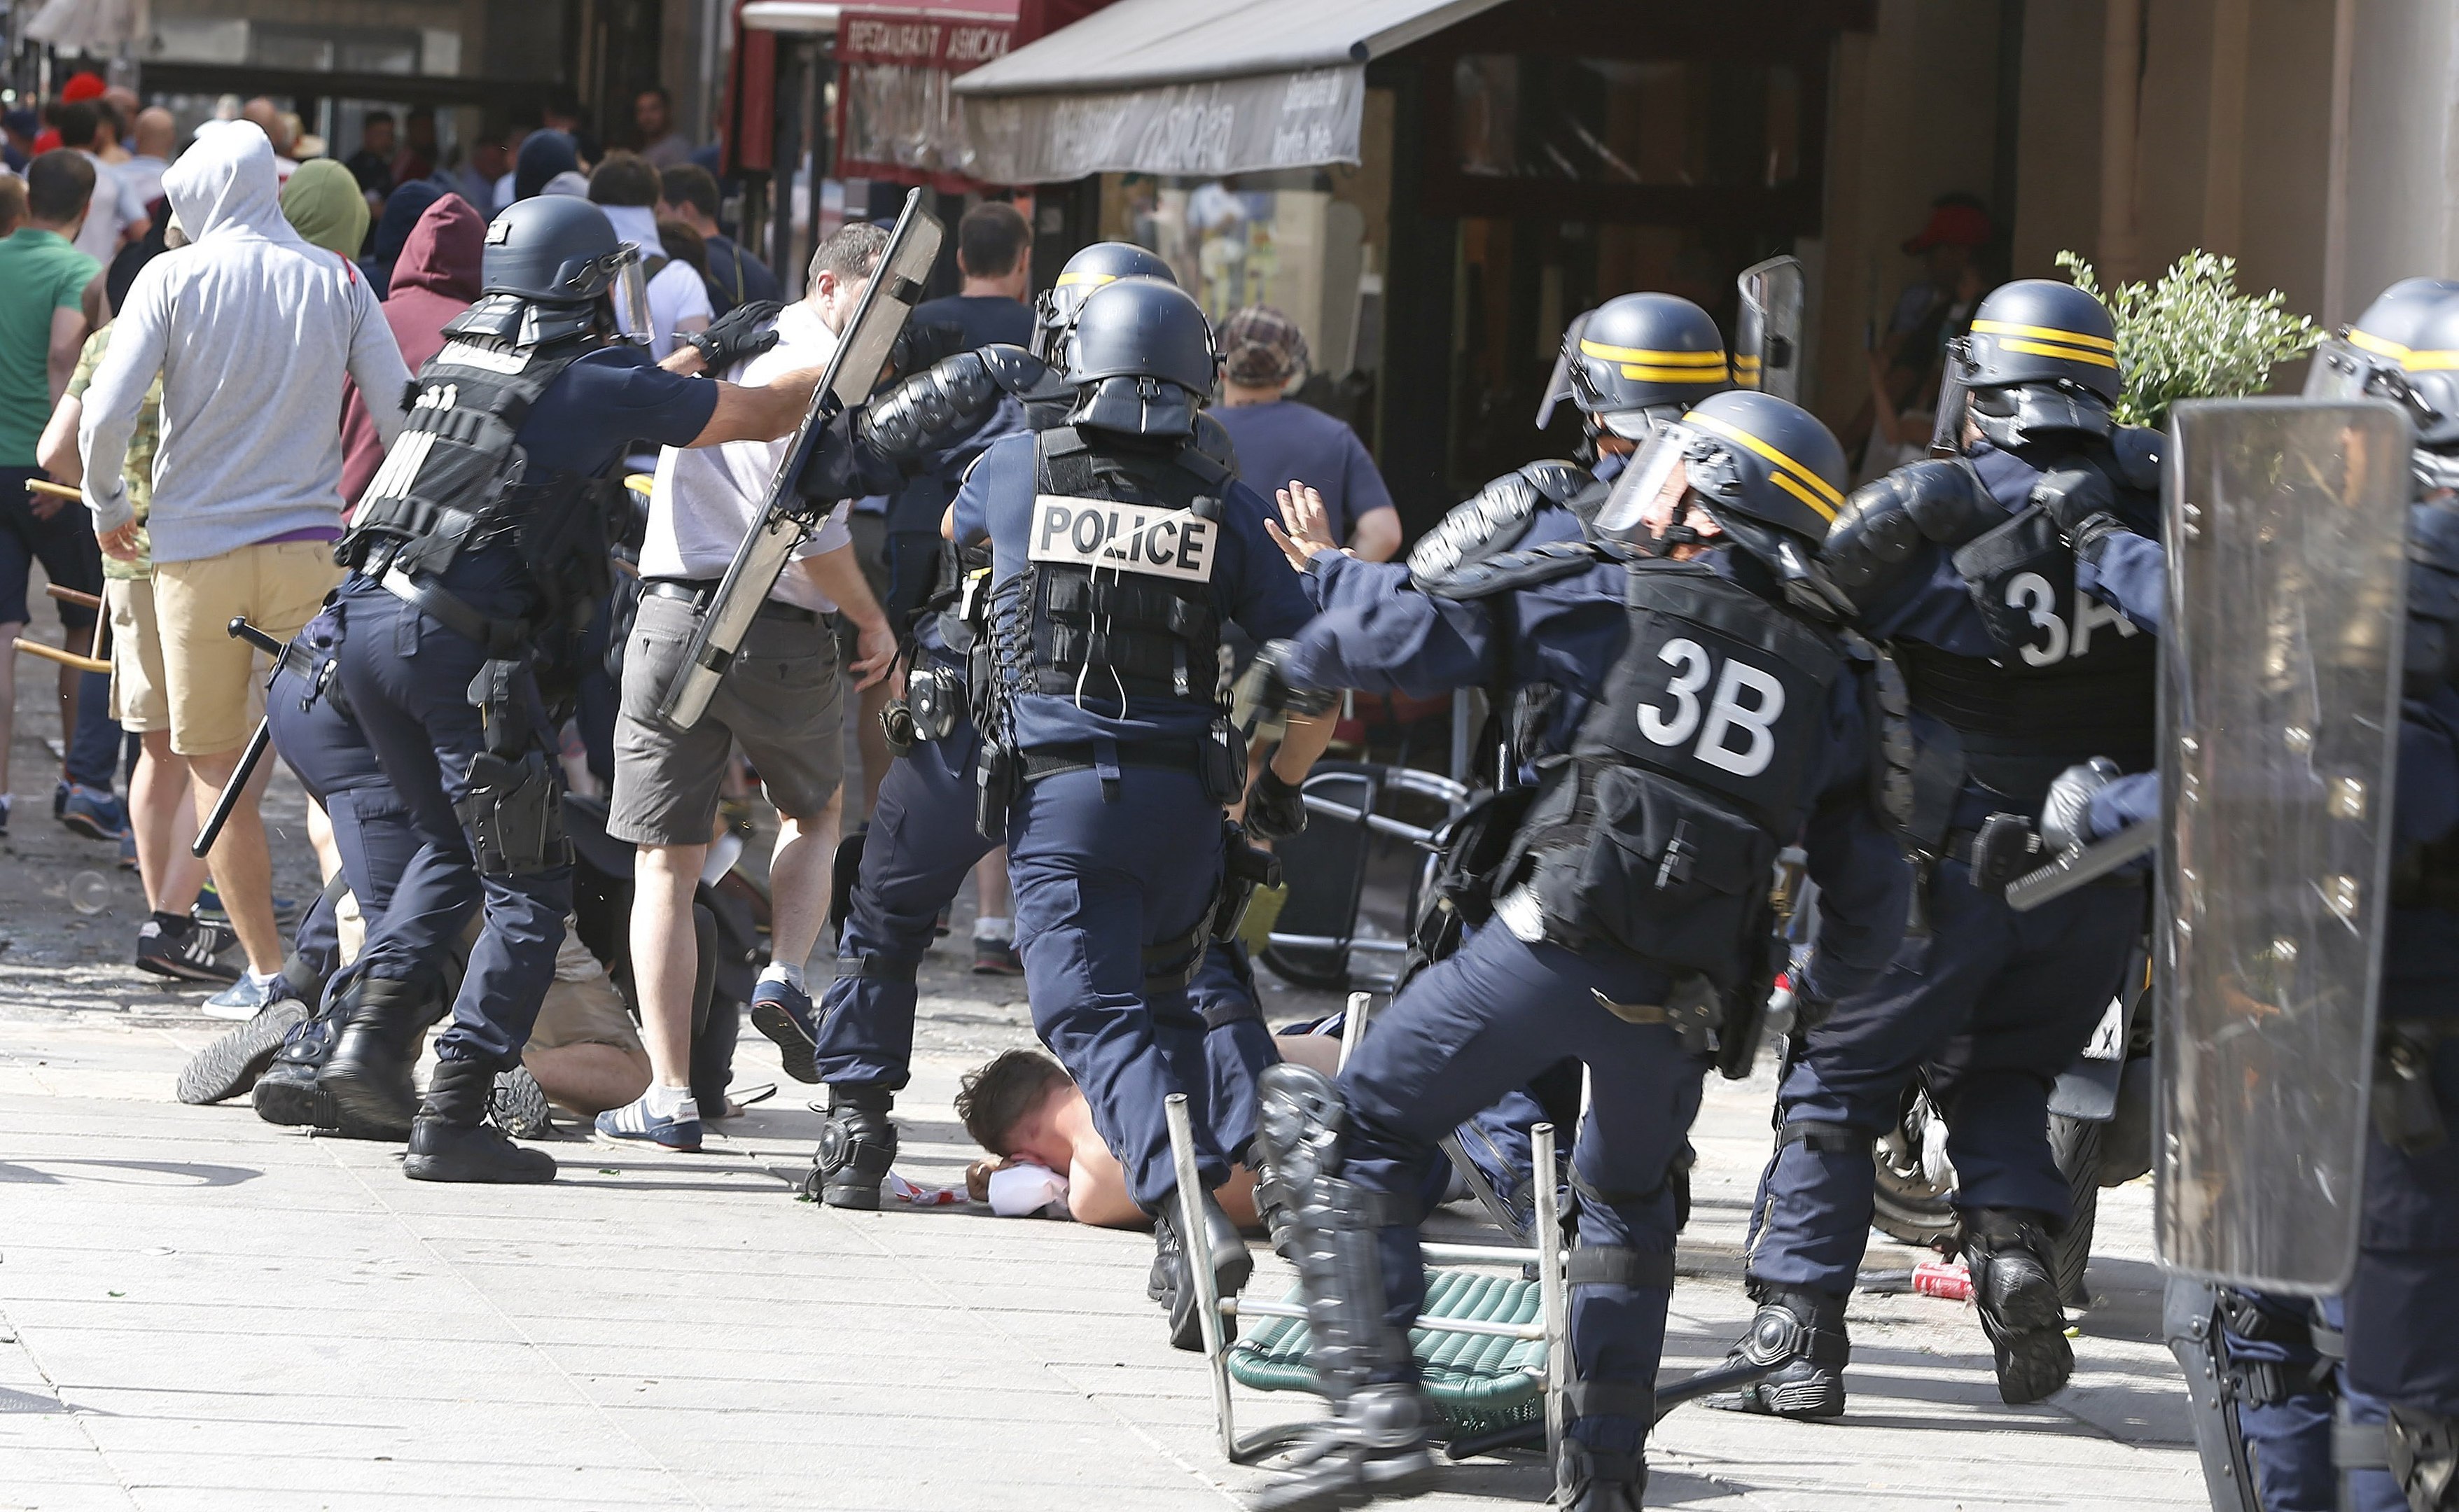 French police officers charge soccer supporters during clashes in downtown Marseille, France (AP Photo/Darko Bandic)